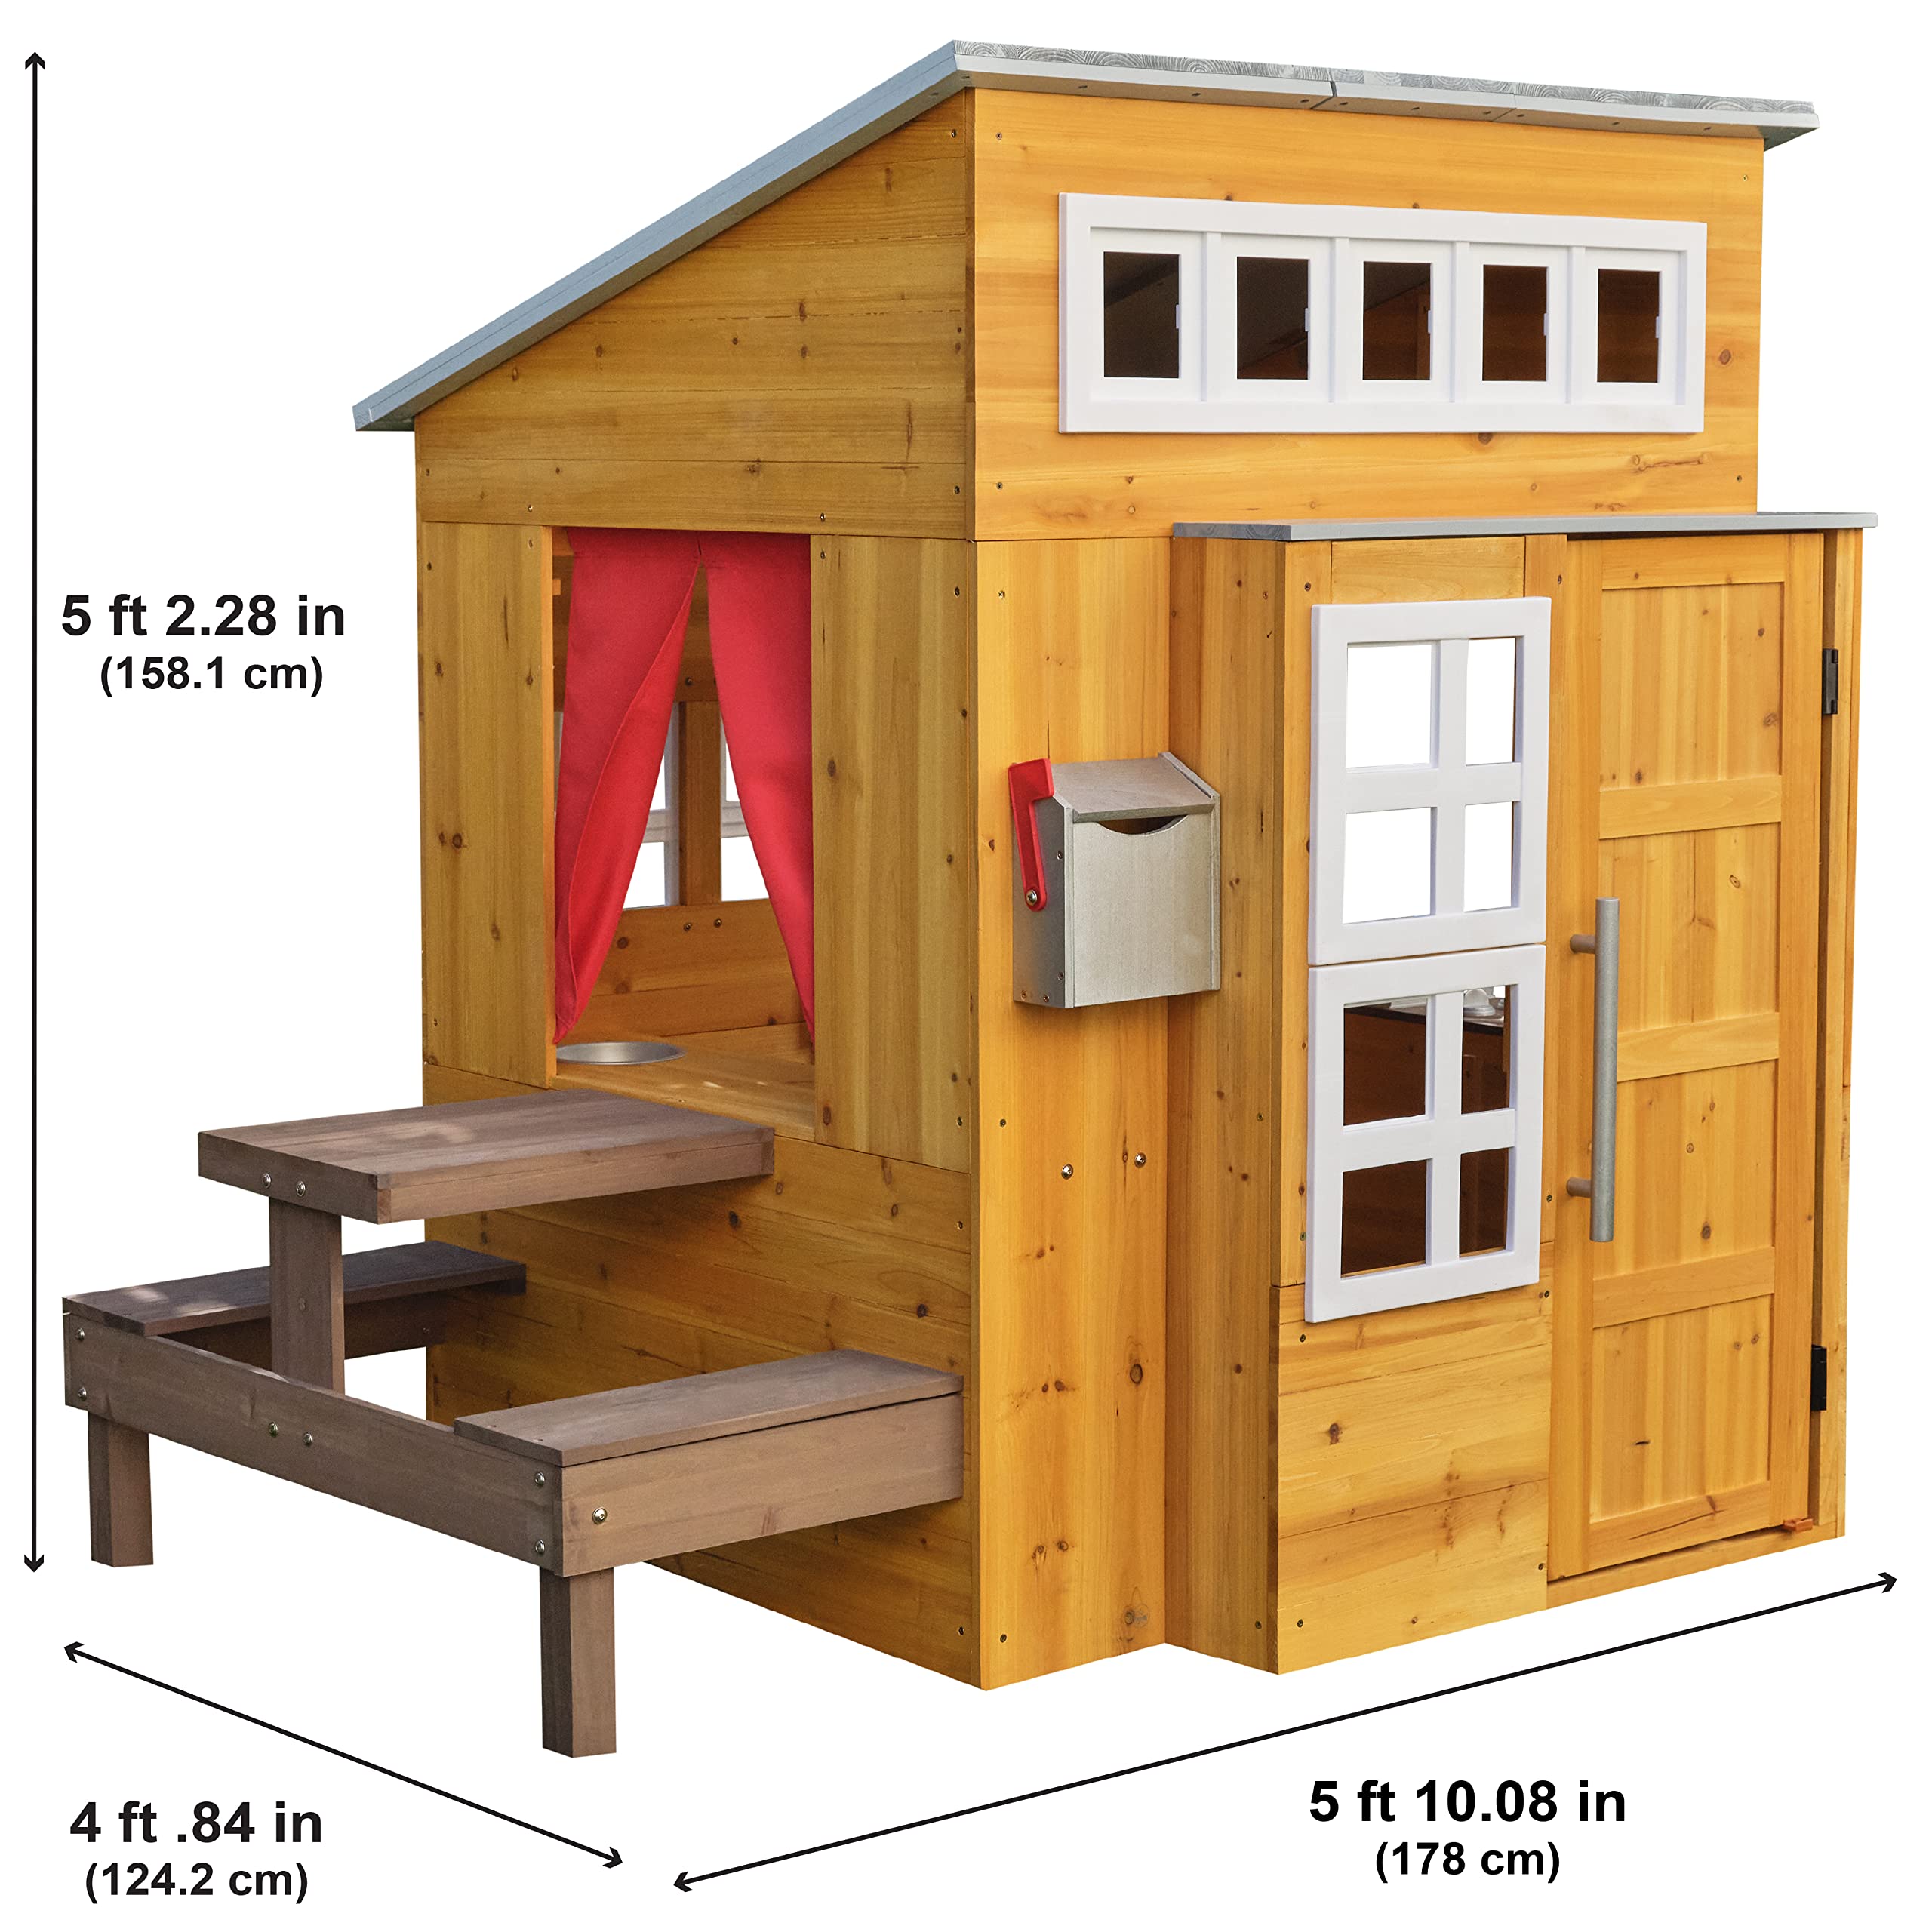 KidKraft Modern Outdoor Wooden Playhouse with Picnic Table, Mailbox and Outdoor Grill, Gift for Ages 3+